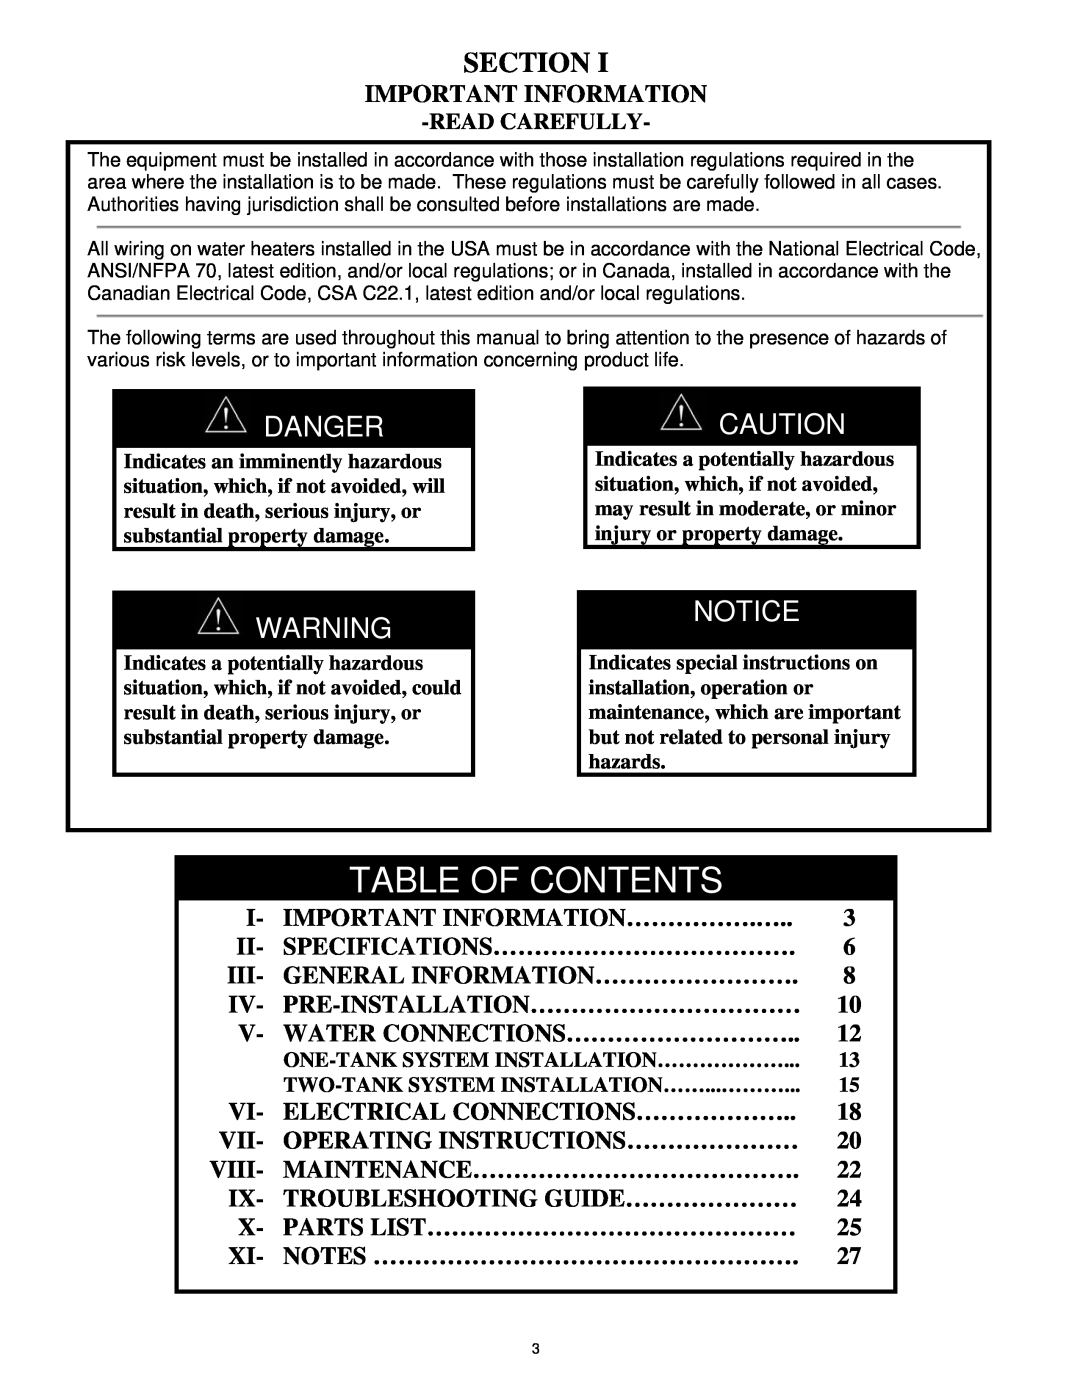 Bradford-White Corp Solar Water Heater manual Section, Danger, Table Of Contents 